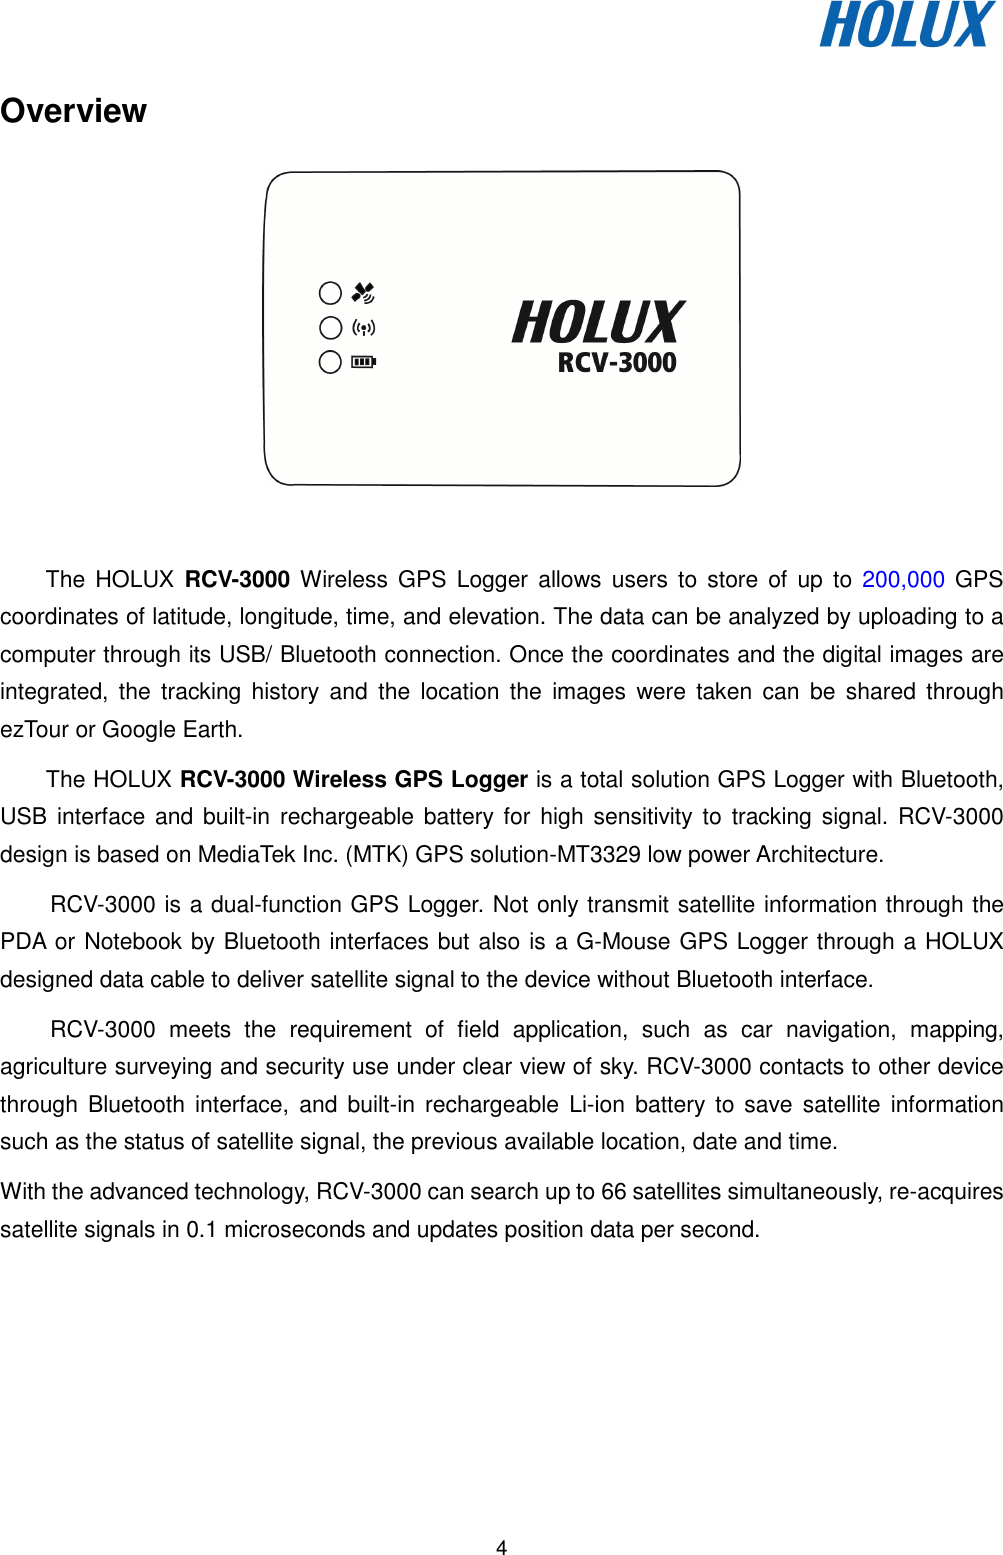   4 Overview   The  HOLUX RCV-3000 Wireless  GPS  Logger  allows  users  to  store of  up  to  200,000  GPS coordinates of latitude, longitude, time, and elevation. The data can be analyzed by uploading to a computer through its USB/ Bluetooth connection. Once the coordinates and the digital images are integrated,  the  tracking  history  and  the  location  the  images  were  taken  can  be  shared  through ezTour or Google Earth. The HOLUX RCV-3000 Wireless GPS Logger is a total solution GPS Logger with Bluetooth, USB interface and built-in  rechargeable battery for high sensitivity to  tracking signal. RCV-3000 design is based on MediaTek Inc. (MTK) GPS solution-MT3329 low power Architecture.   RCV-3000 is a dual-function GPS Logger. Not only transmit satellite information through the PDA or Notebook by Bluetooth interfaces but also is a G-Mouse GPS Logger through a HOLUX designed data cable to deliver satellite signal to the device without Bluetooth interface. RCV-3000  meets  the  requirement  of  field  application,  such  as  car  navigation,  mapping, agriculture surveying and security use under clear view of sky. RCV-3000 contacts to other device through  Bluetooth  interface,  and  built-in rechargeable Li-ion  battery  to save  satellite  information such as the status of satellite signal, the previous available location, date and time. With the advanced technology, RCV-3000 can search up to 66 satellites simultaneously, re-acquires satellite signals in 0.1 microseconds and updates position data per second. 